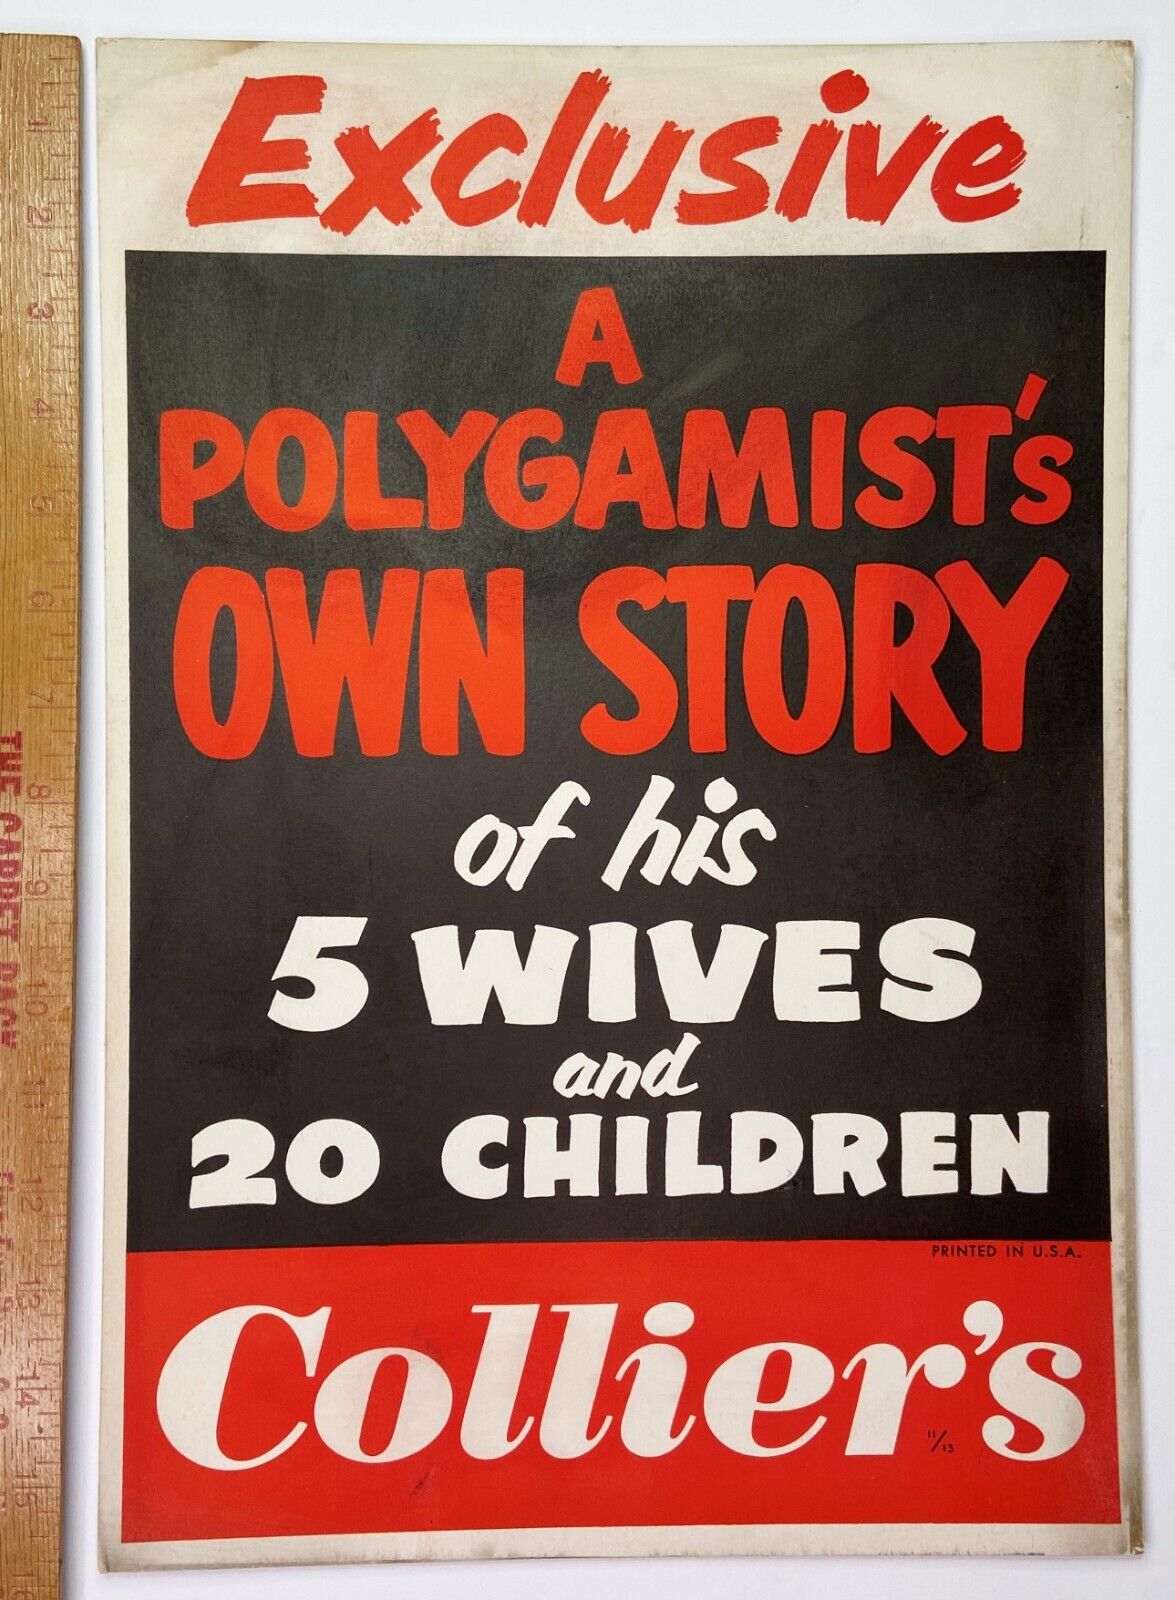 Mormon Polygamist 1955 - Collier\'s 11 x 16 - RARE ORIG Advertising Store Sign -